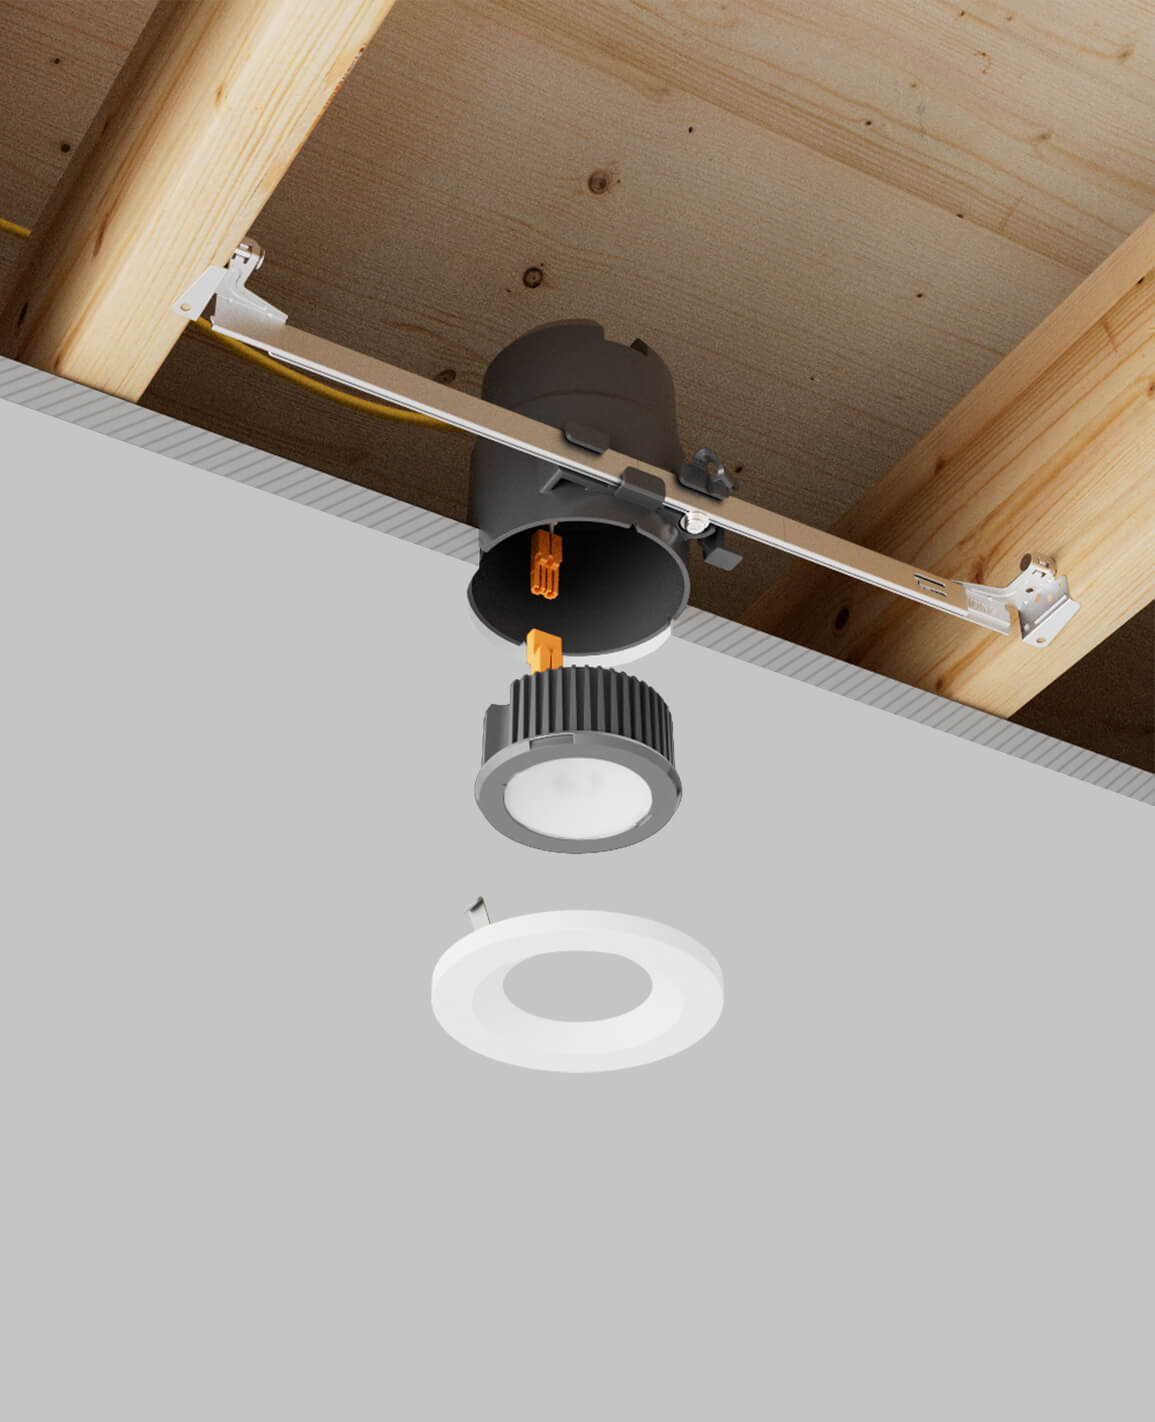 3" recessed light with bar hangers housing and surface white trim 